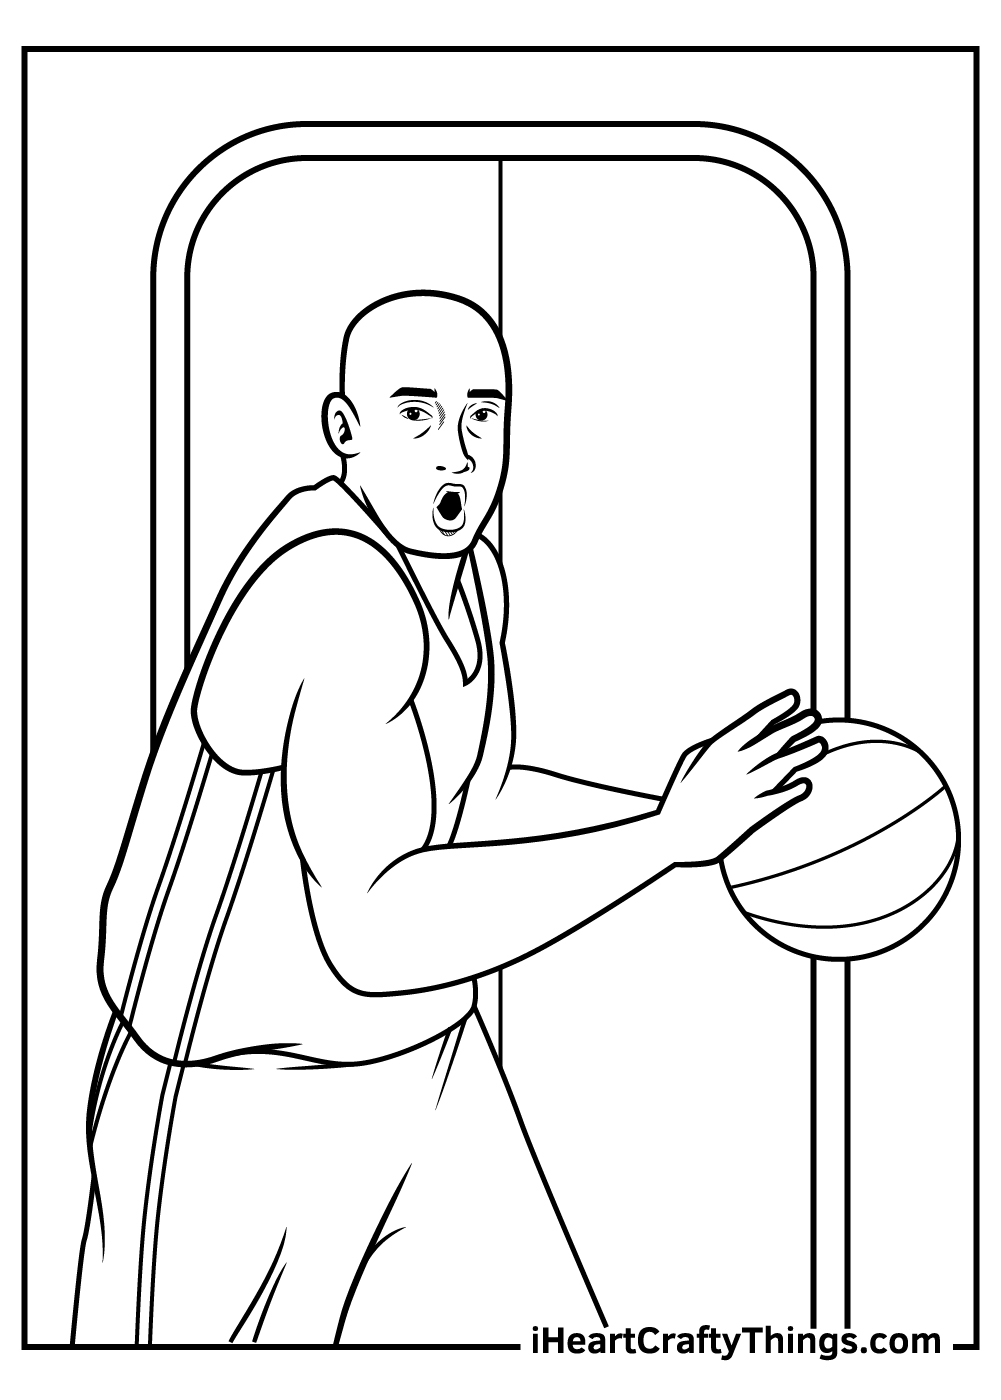 Nba coloring pages free printables